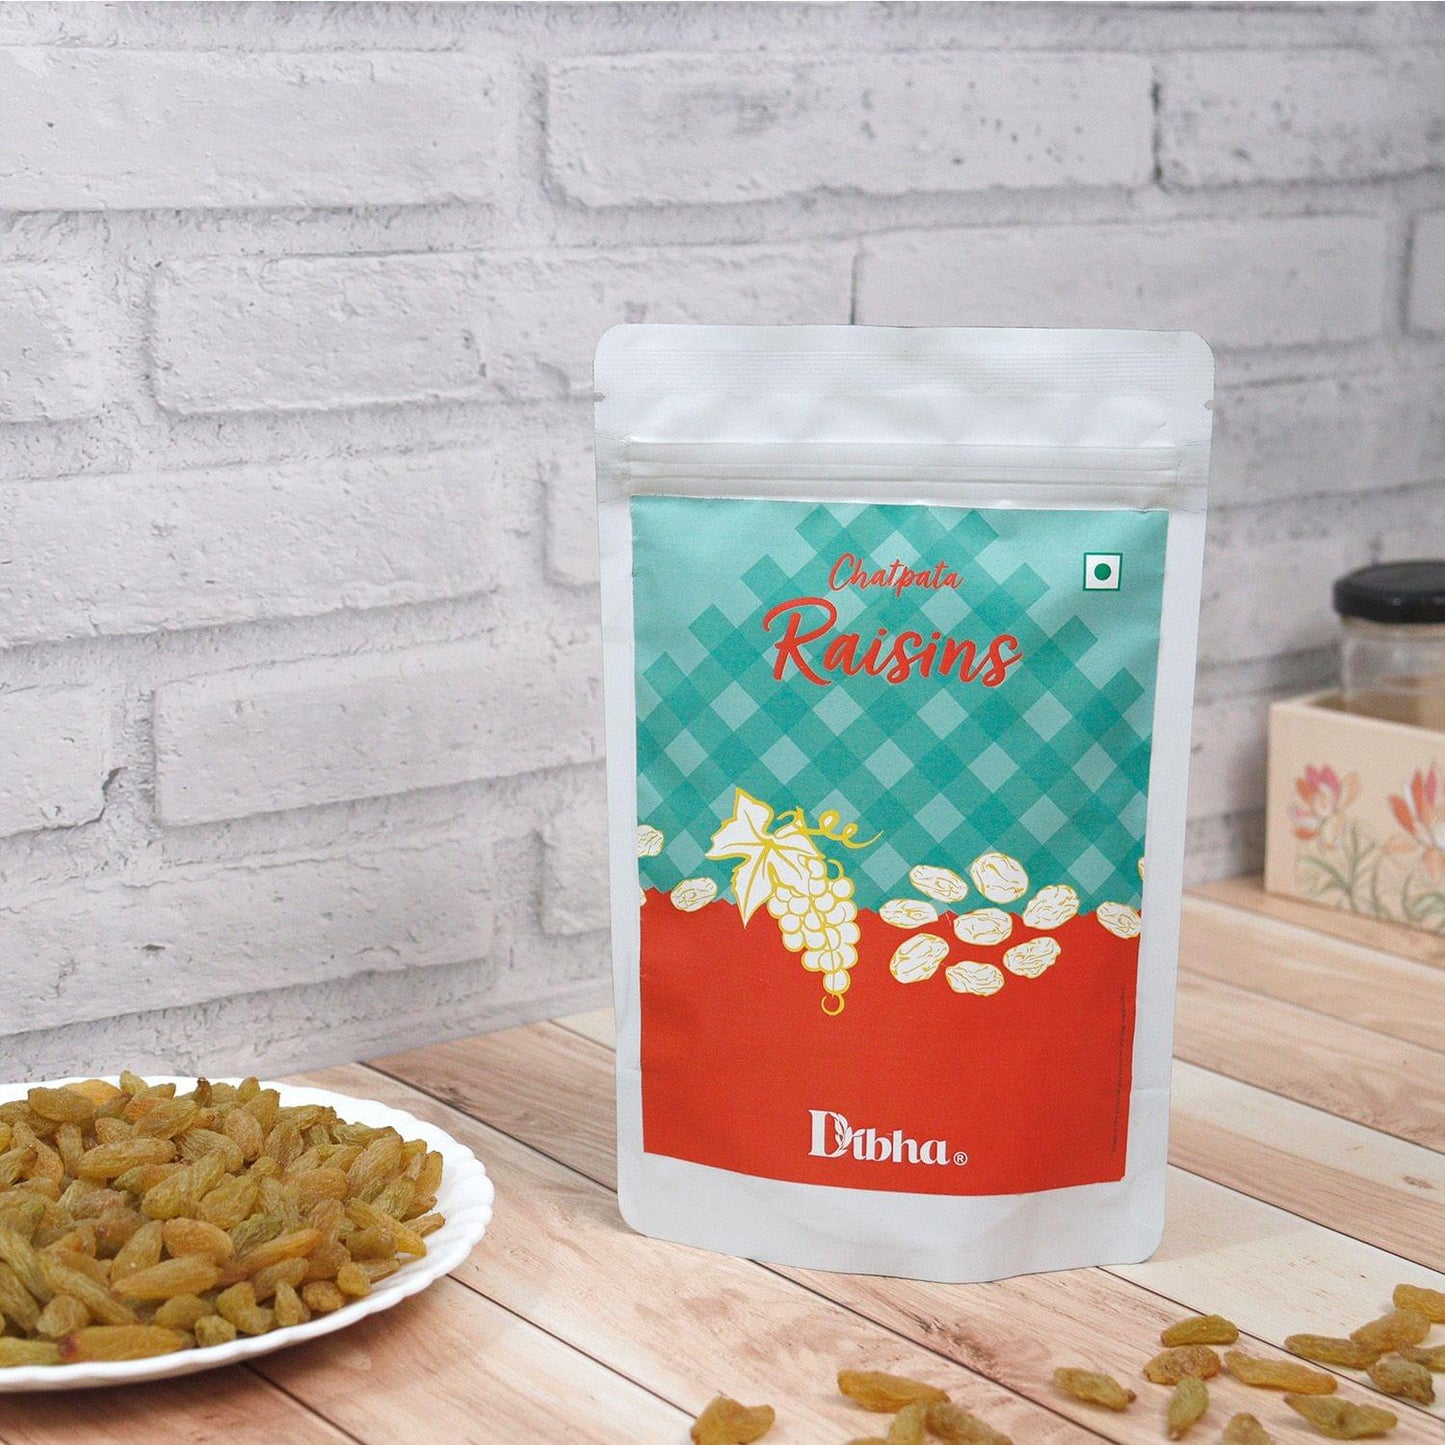 DIBHA - HONEST SNACKING Chatpata Raisins 200g Healthy Munching, Helps in weightloss, Dry Fruit, High in Protien & Fiber Snack and Super Healthy For taste, fitness and Immunity Tasty Dryfruits